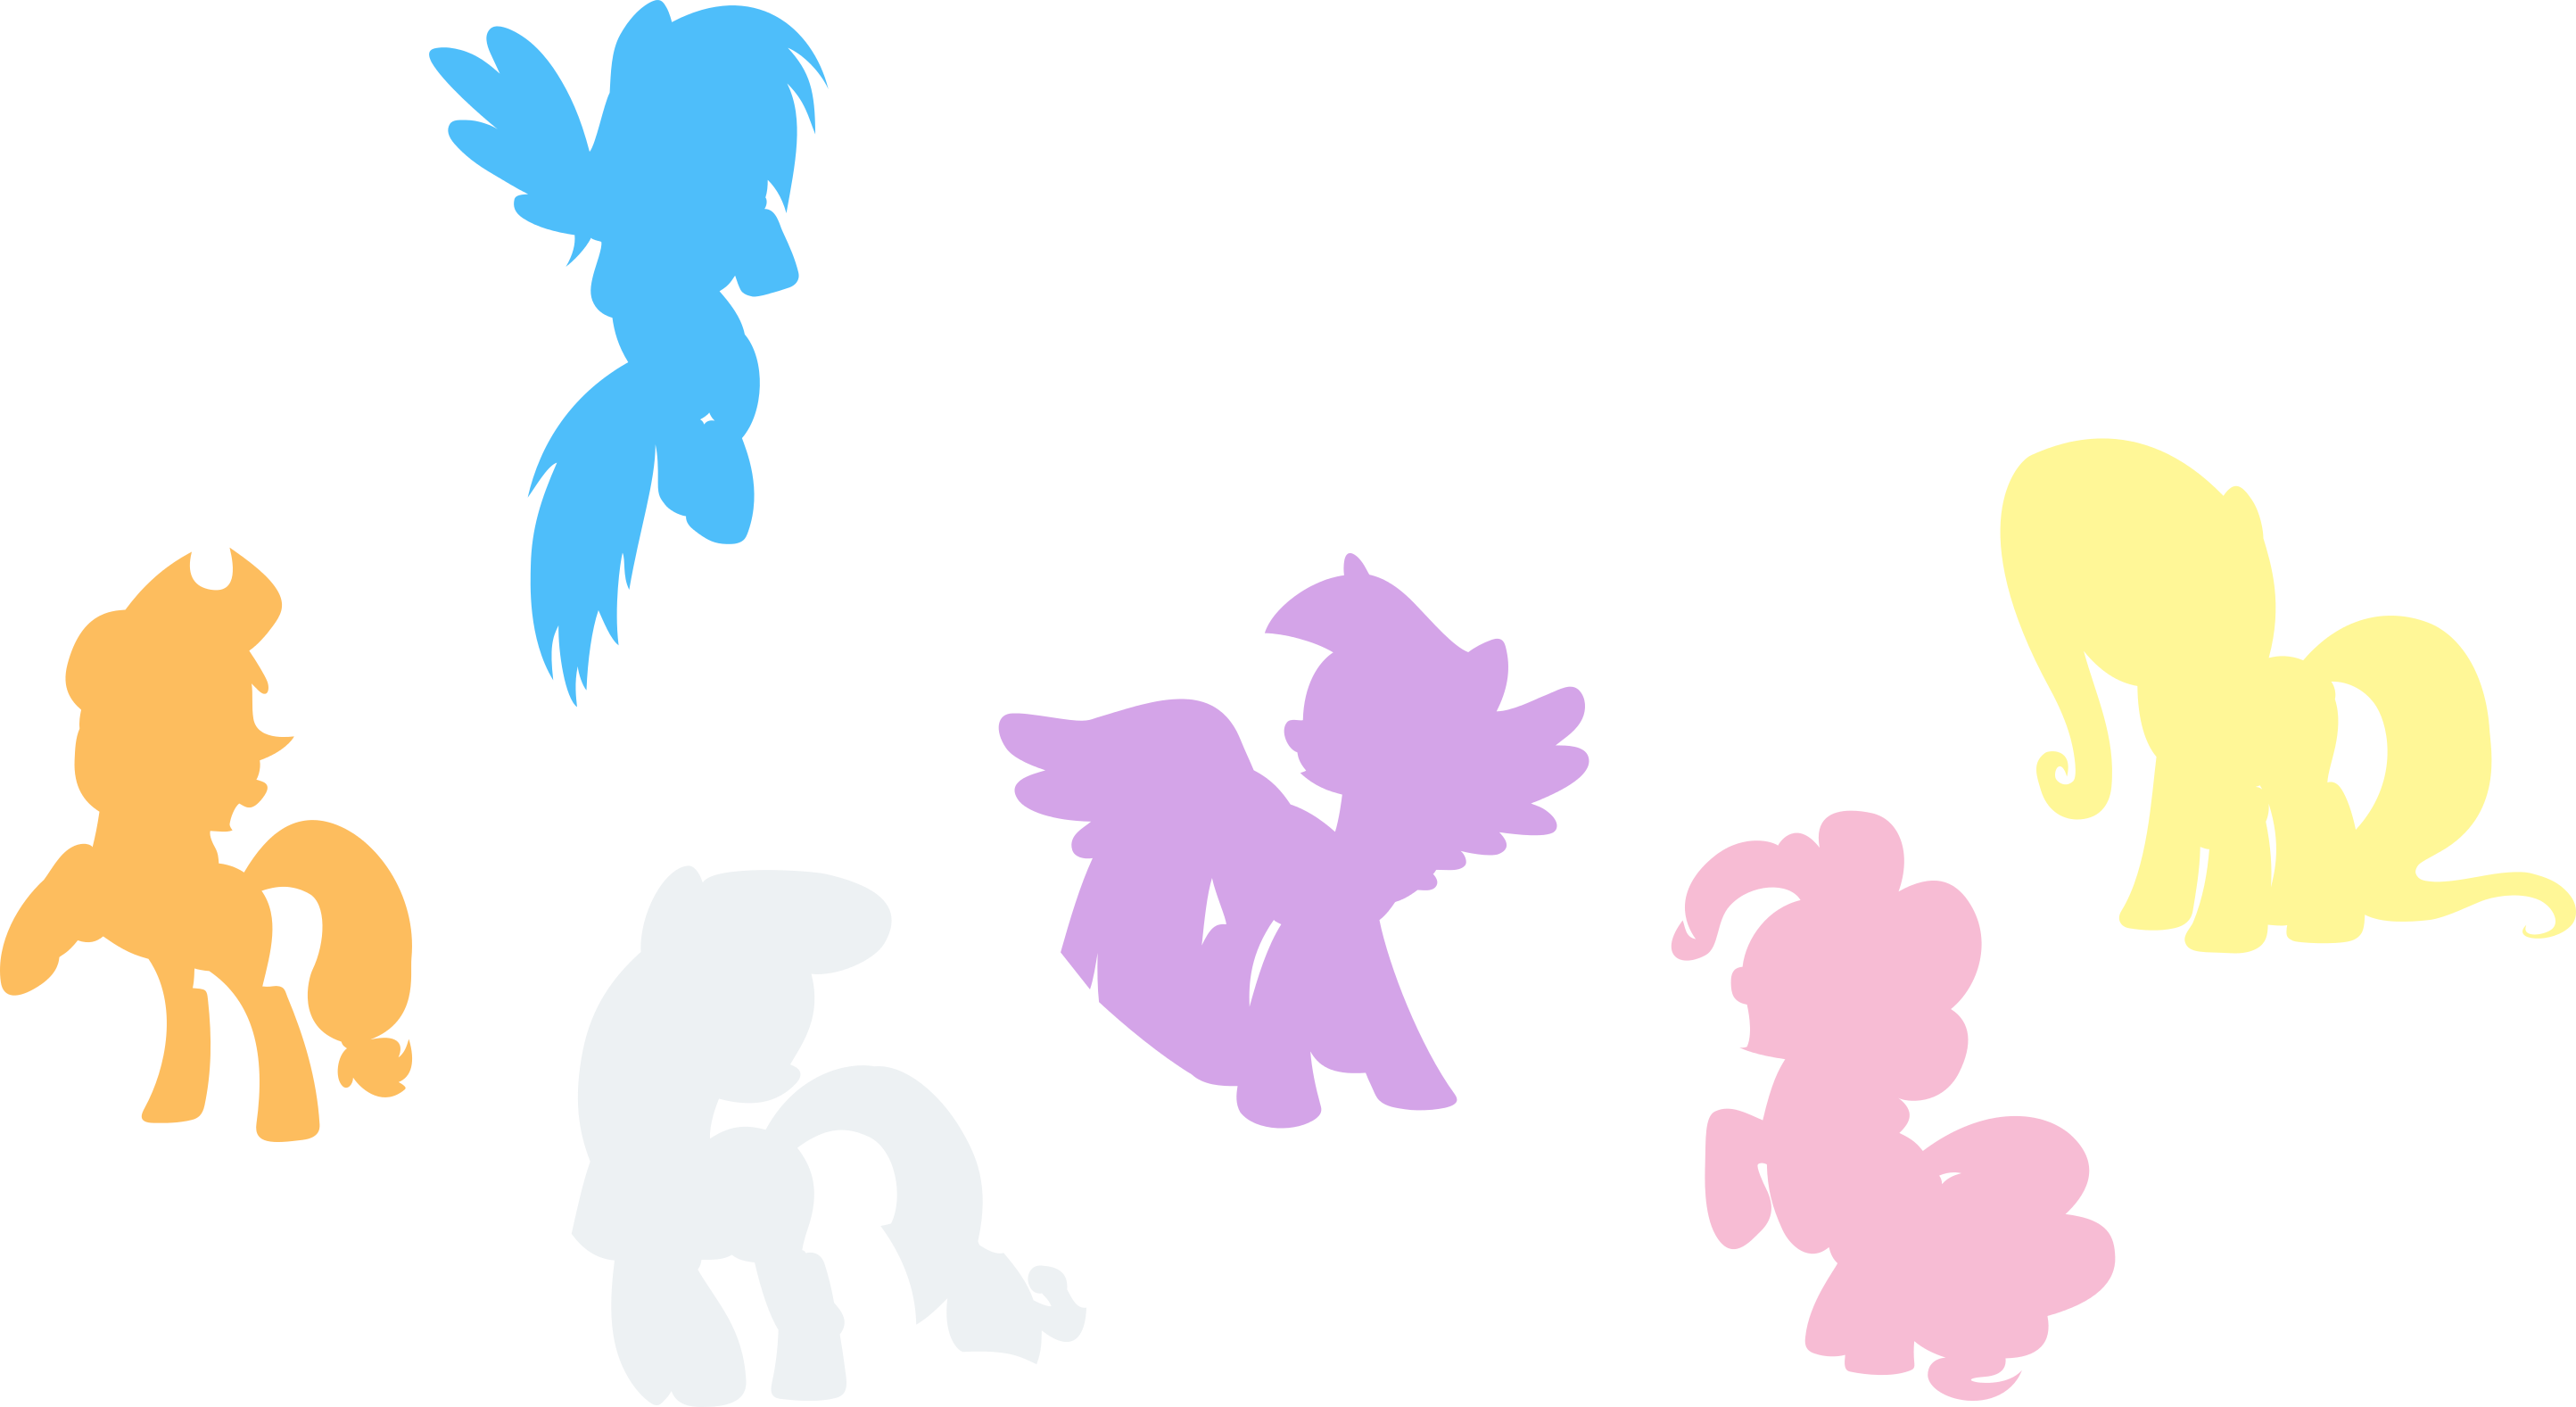 mane_6_silhouettes_by_esc54-d6ifru1.png